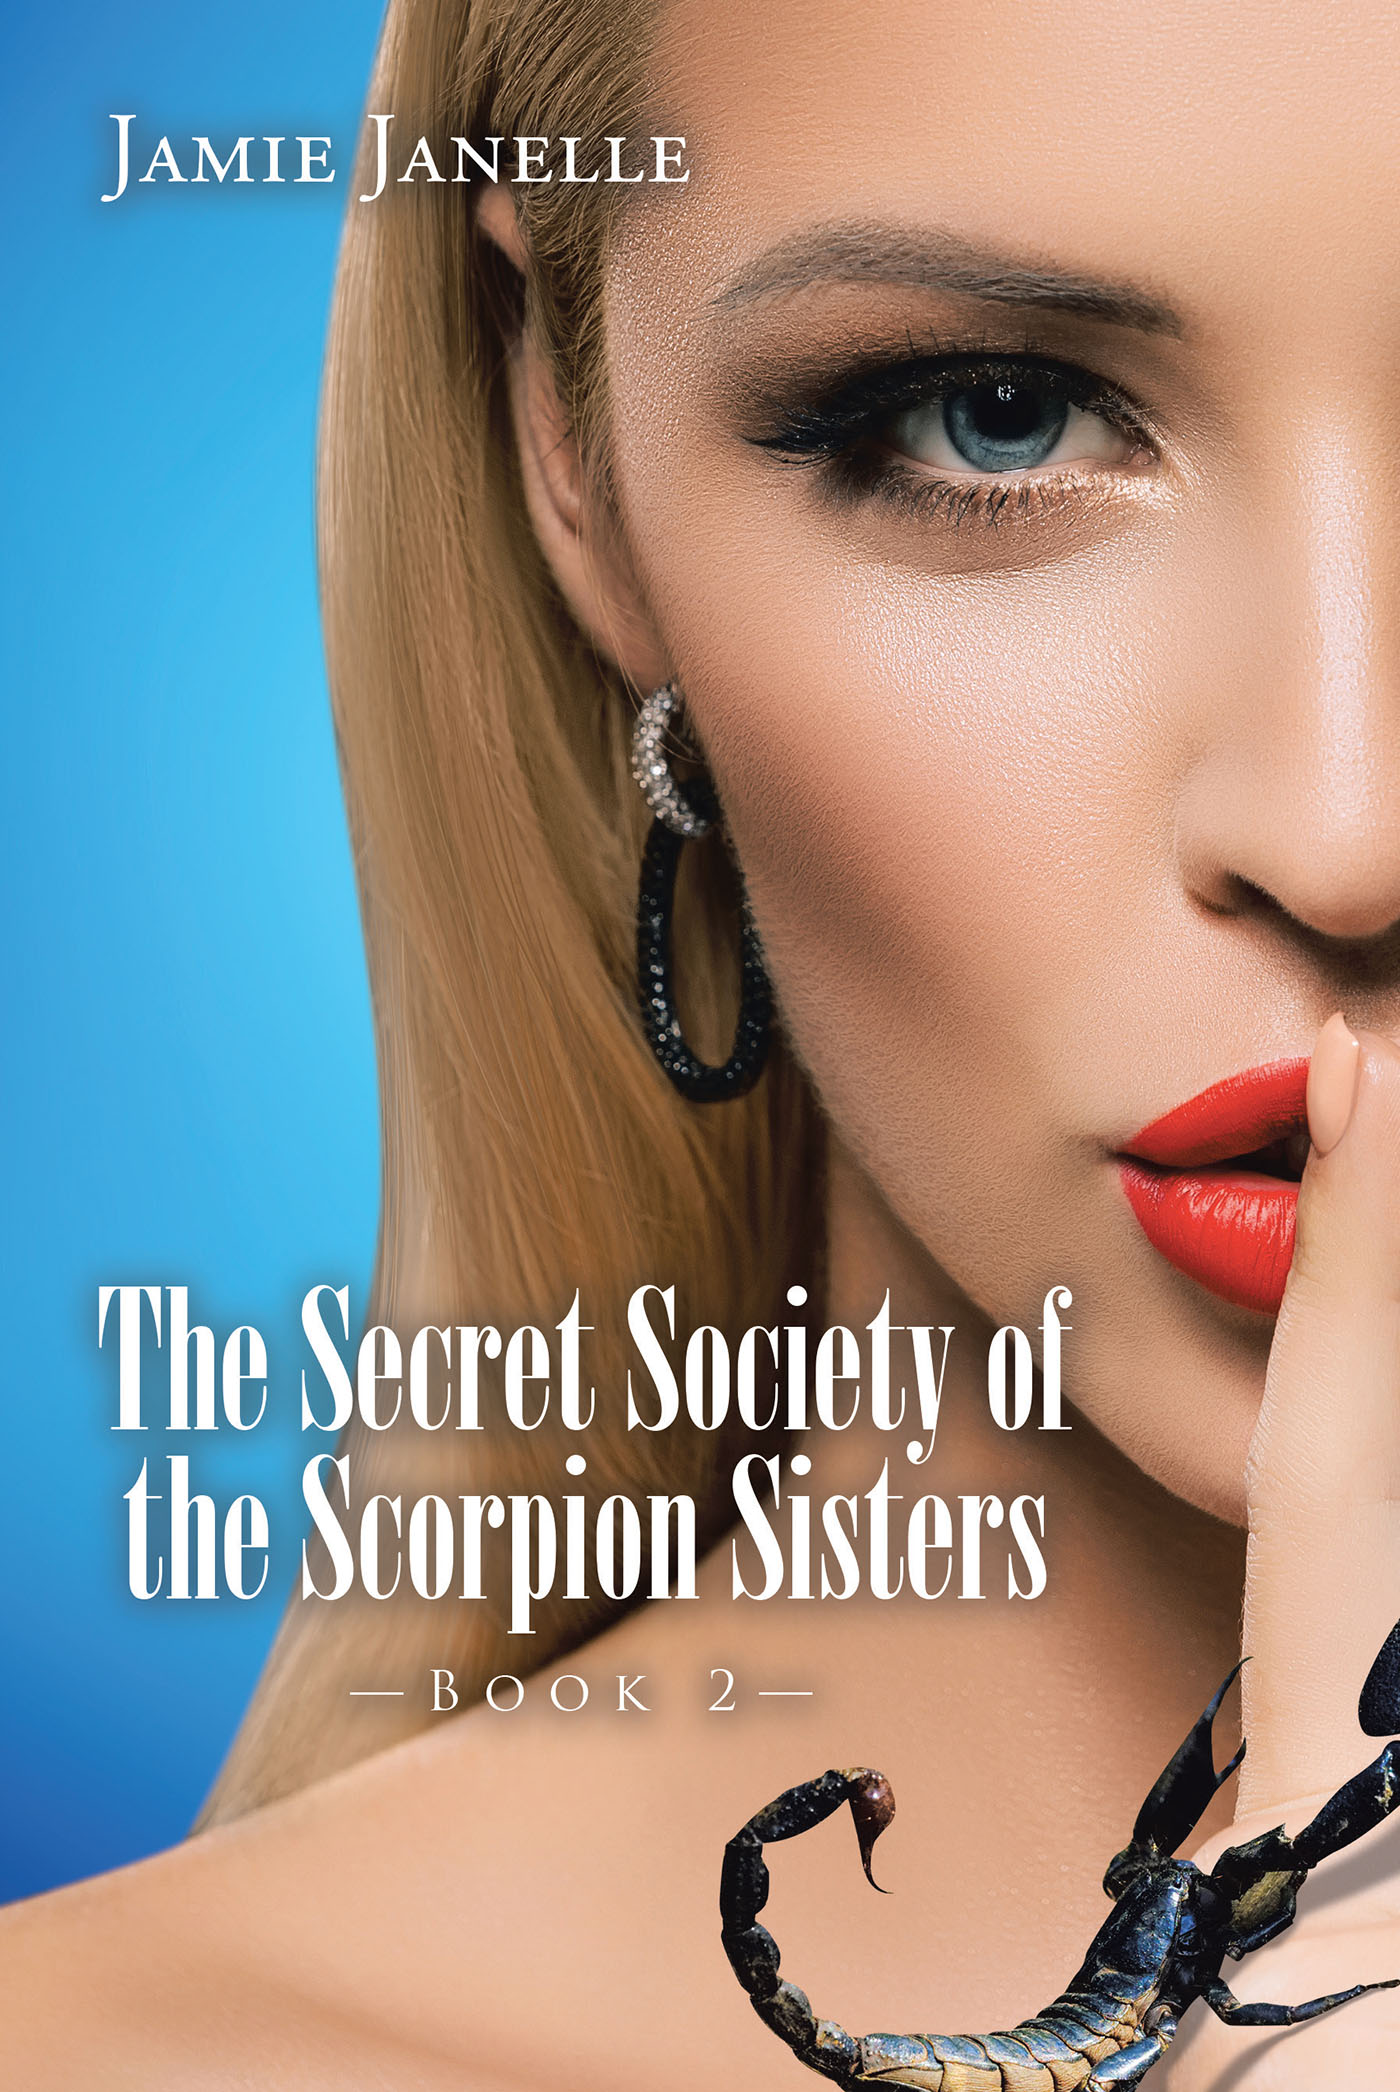 Author Jamie Janelle’s New Book, “The Secret Society of the Scorpion Sisters: Book 2,” Follows a Secret Group Whose Future Becomes Uncertain Following One Member's Arrest